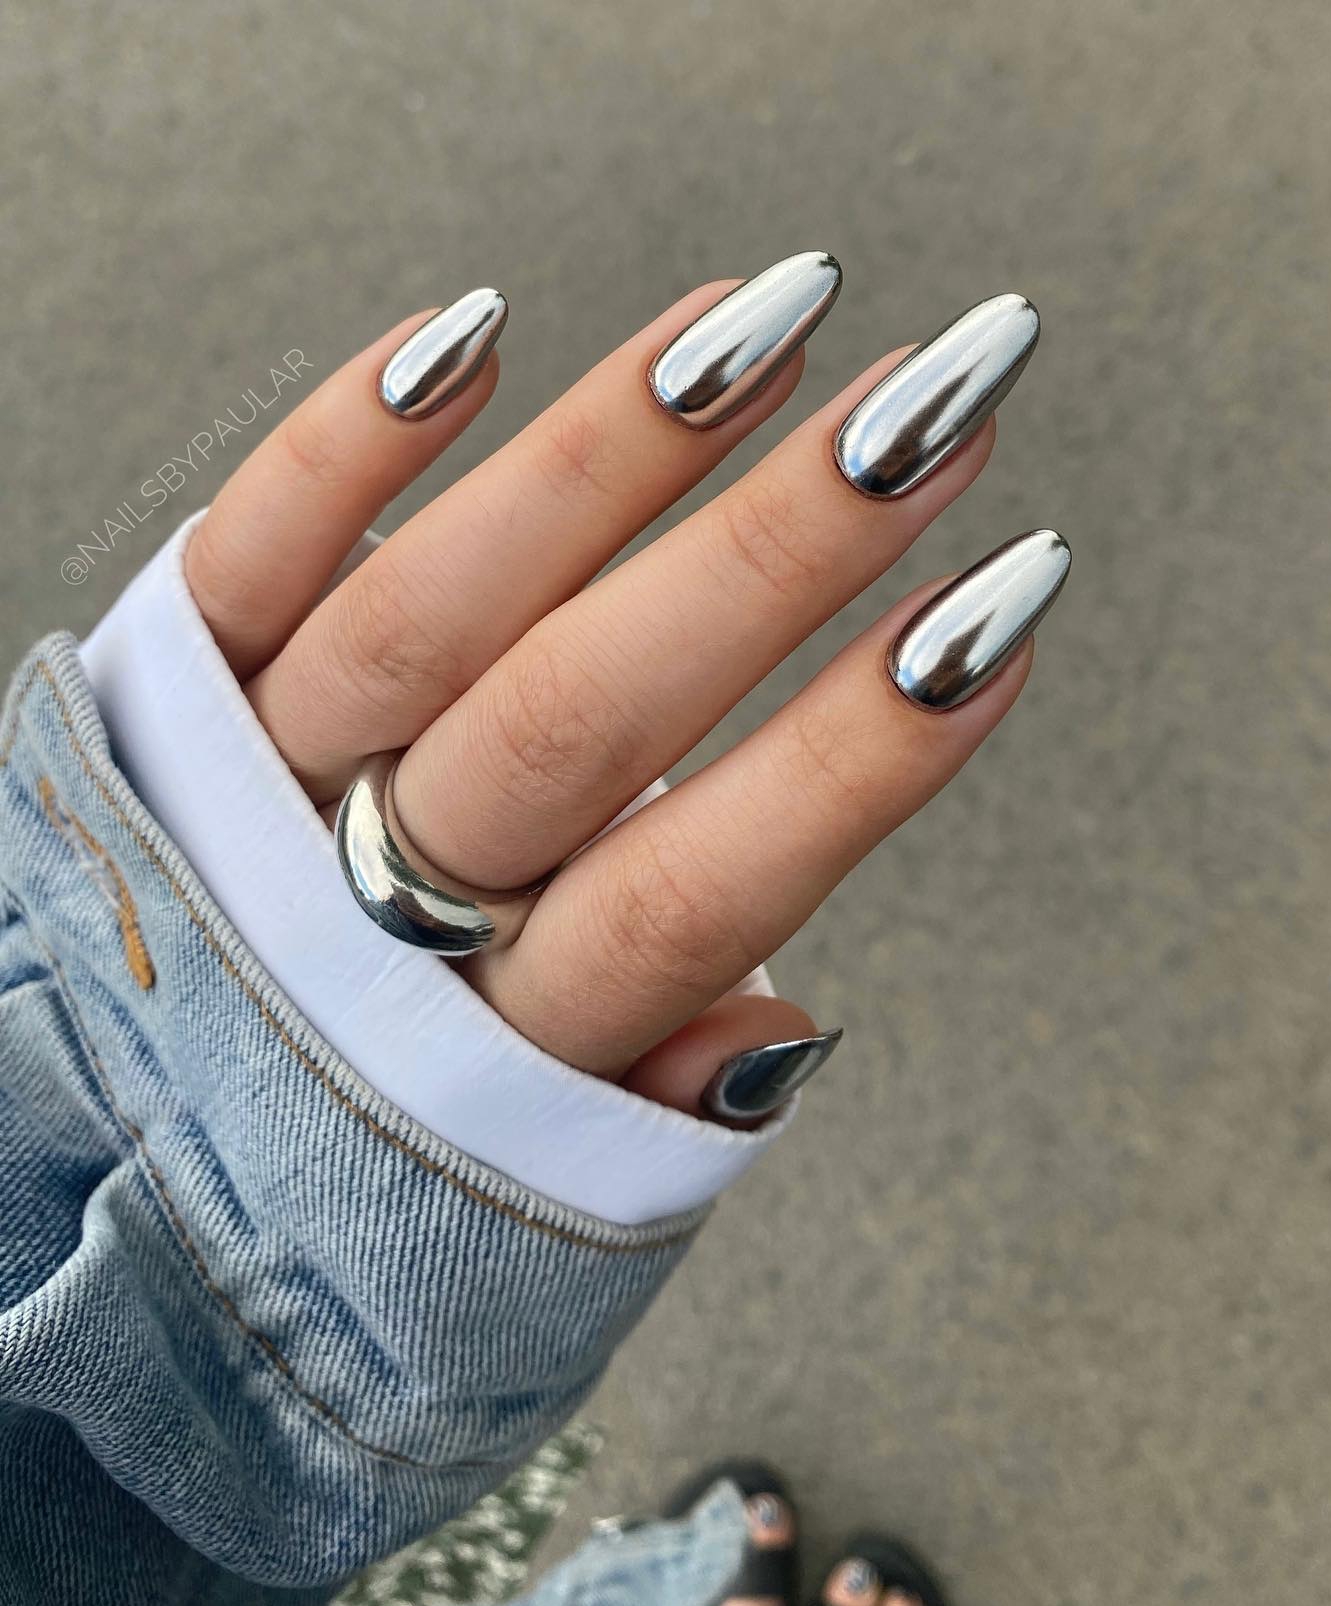 Short Oval Silver Chrome Nails